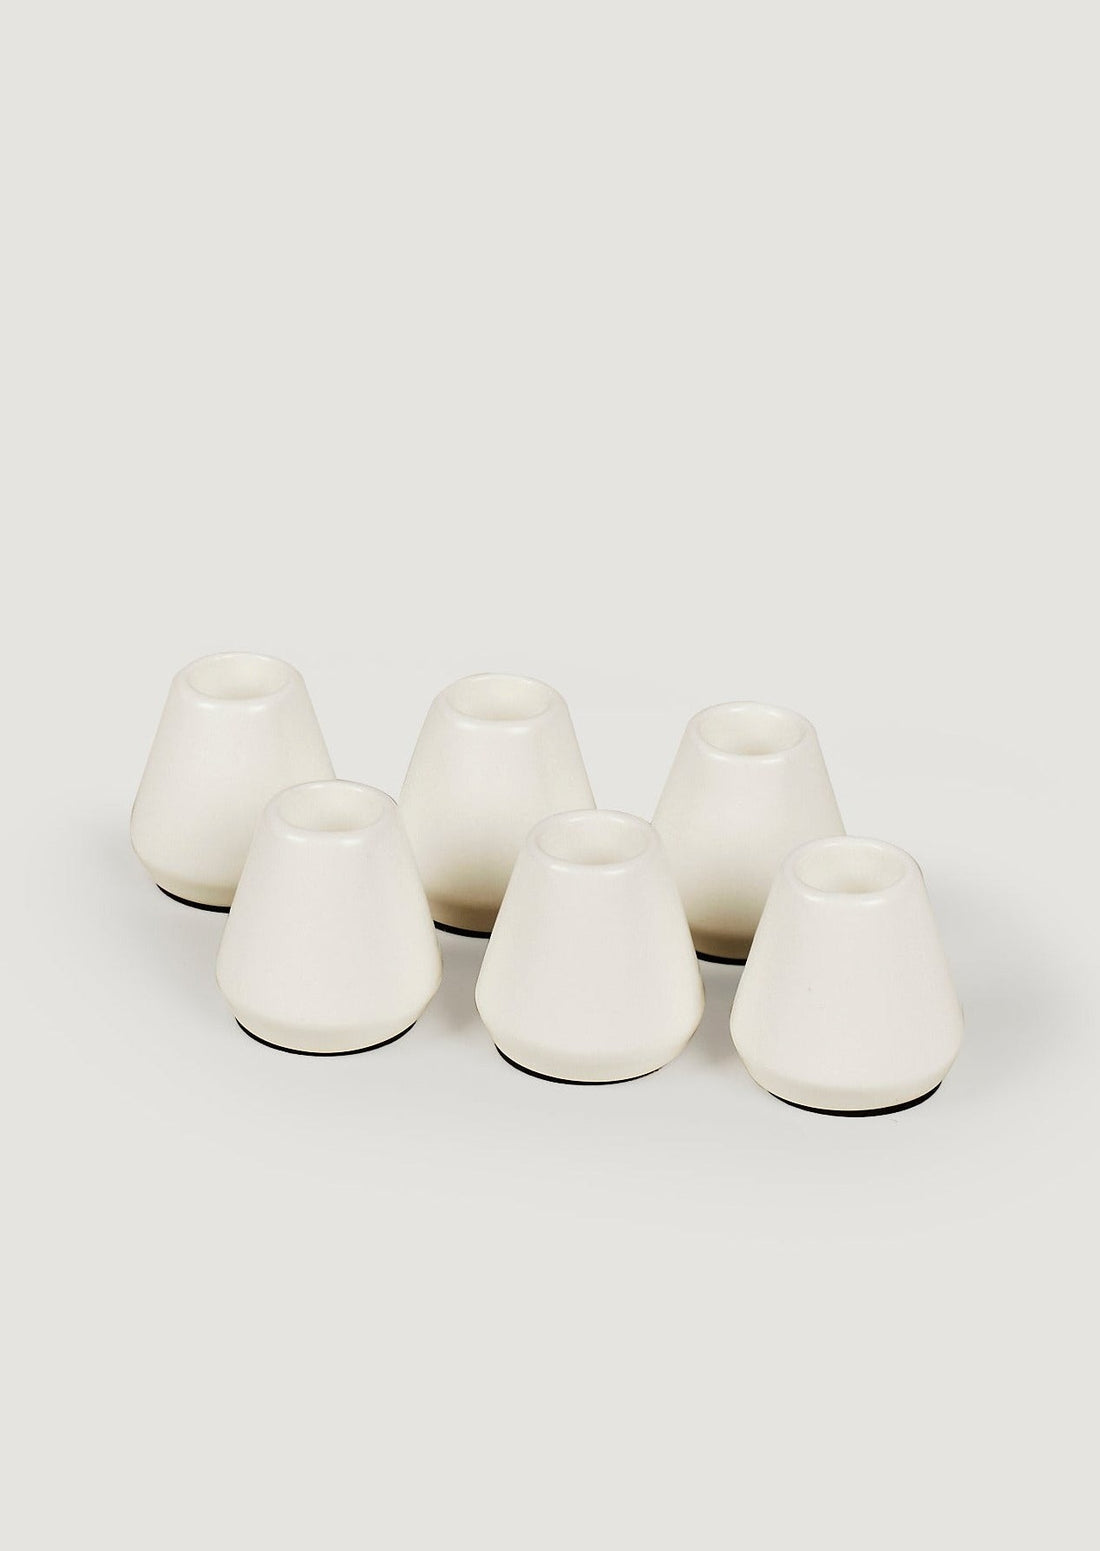 Home Accents Set of 6 White Candle Holders at Afloral 